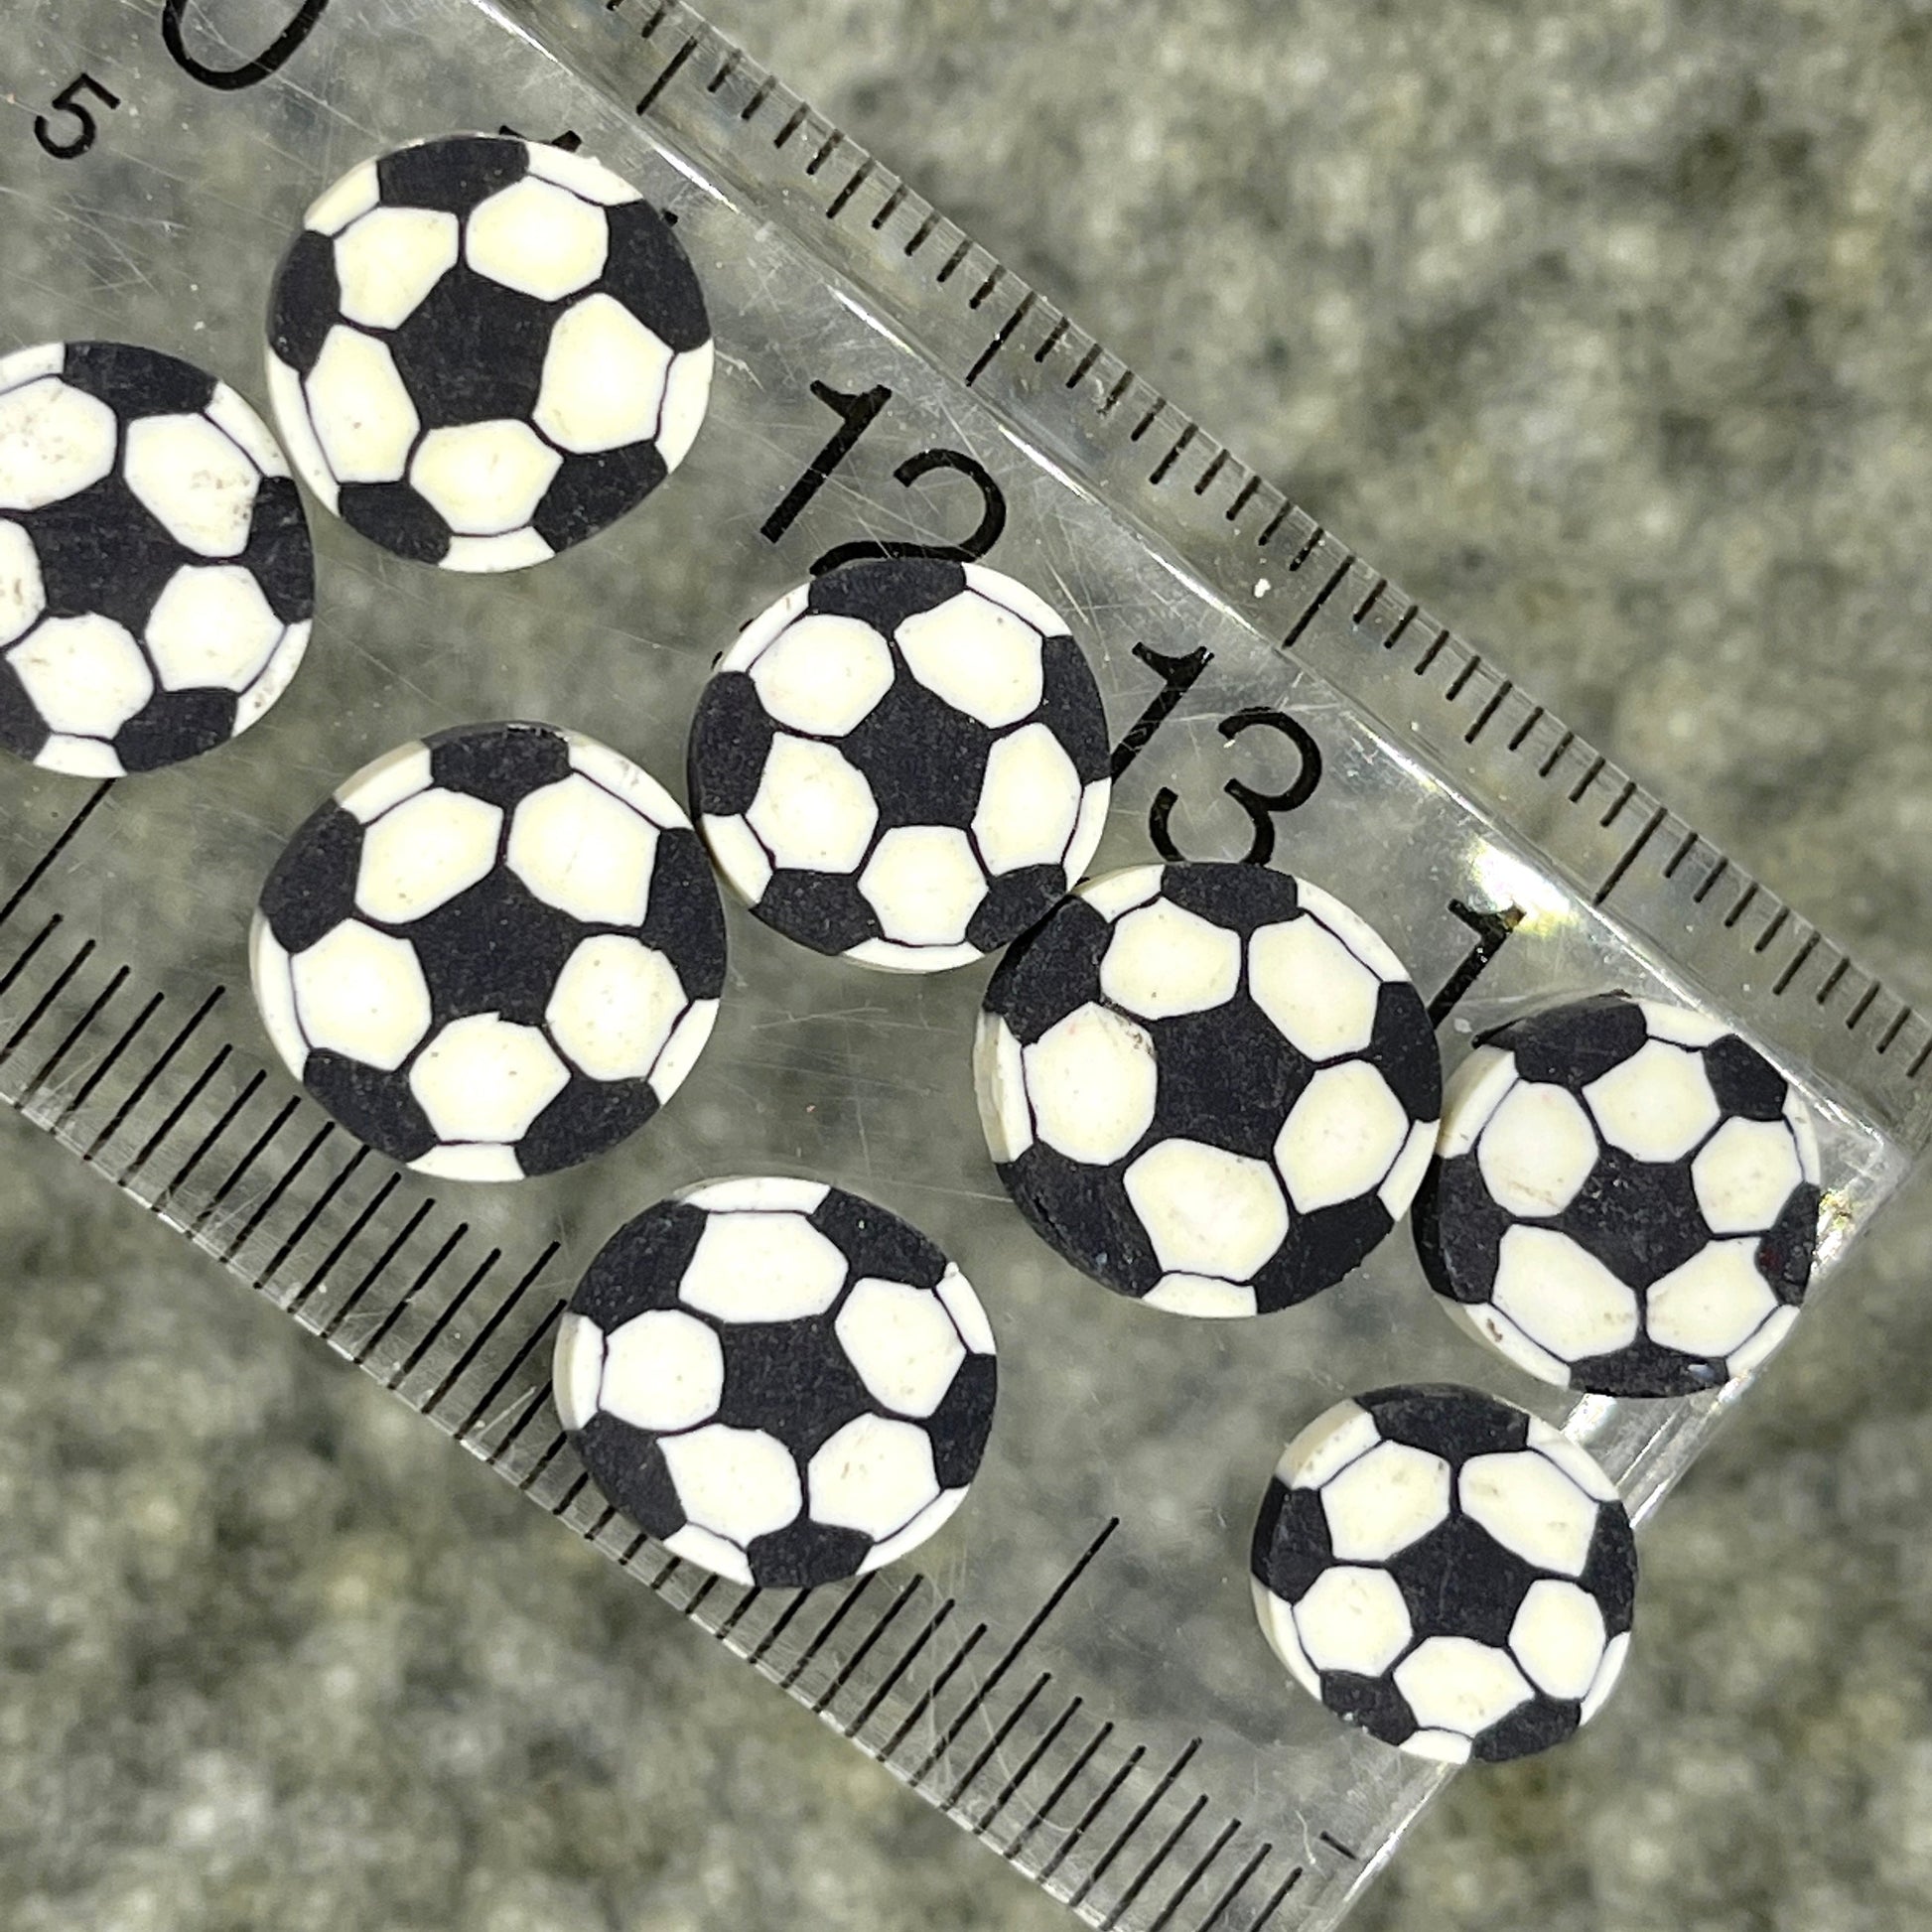 FAKE 5MM/10MM Soccer Football Polymer Clay Sprinkle (NOT EDIBLE) D6-19 (5MM)/ D6-28 (10MM)